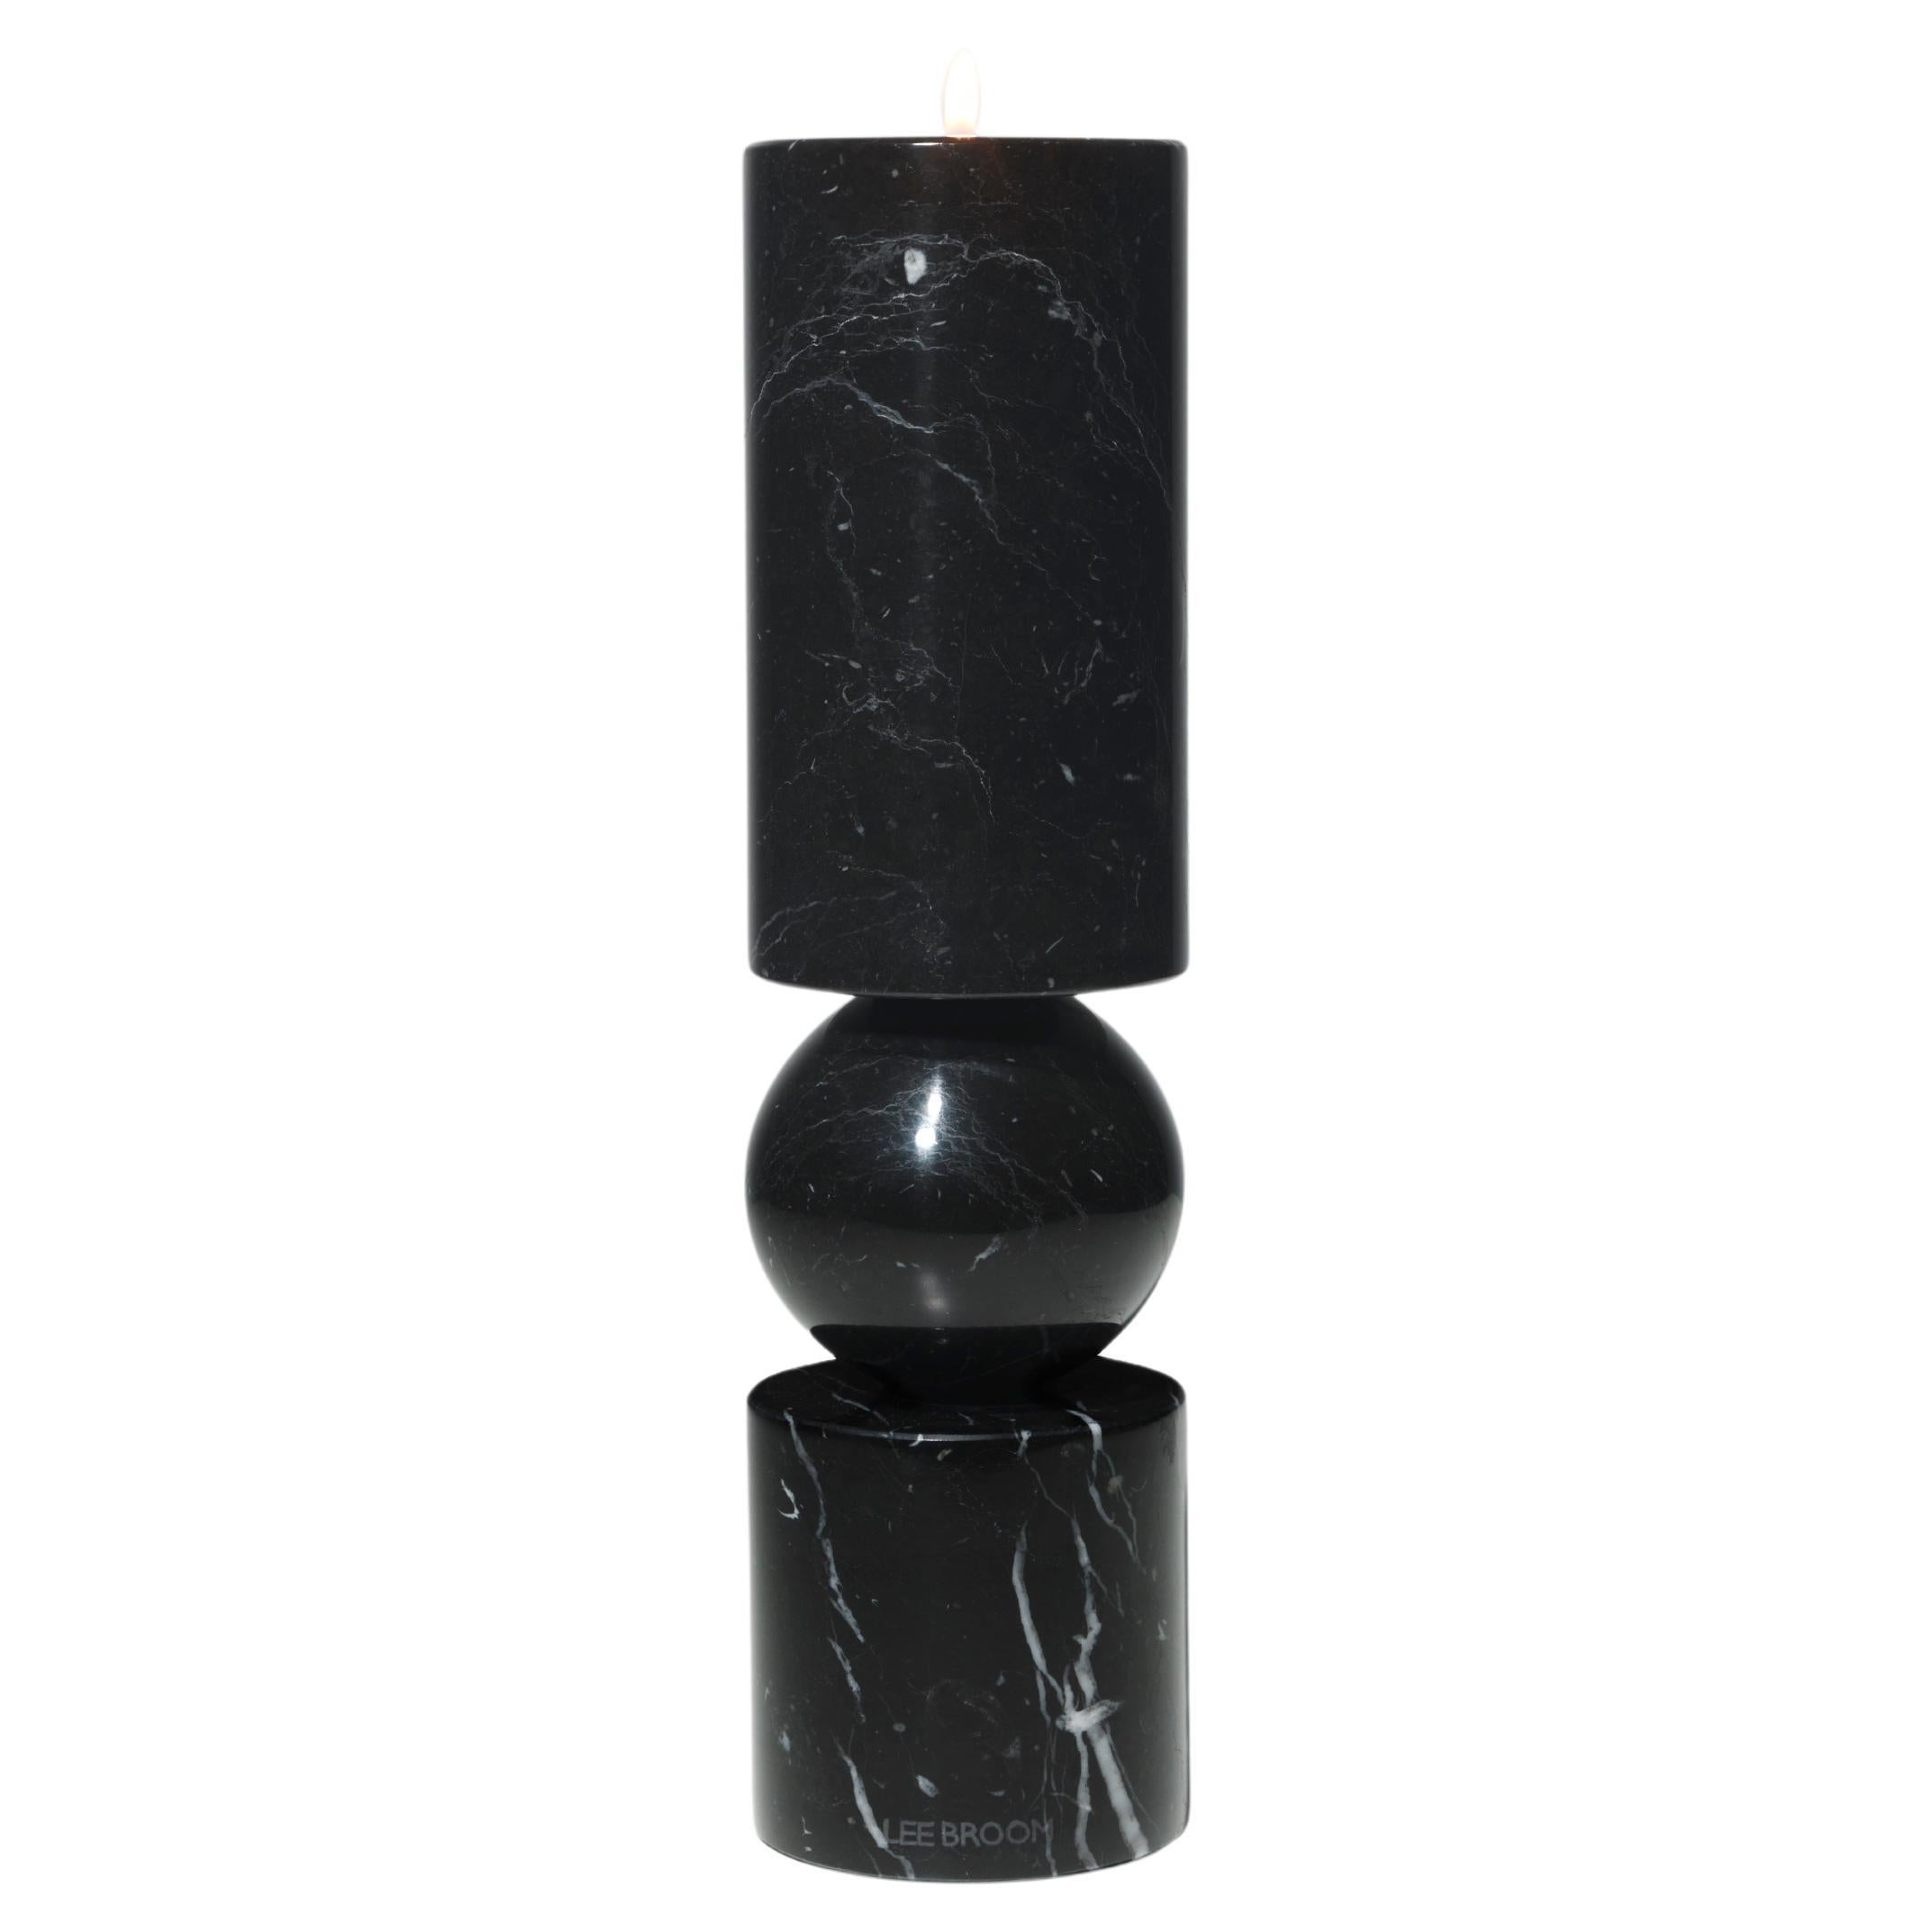 Lee Broom - Fulcrum Candlestick Black Marble - Small